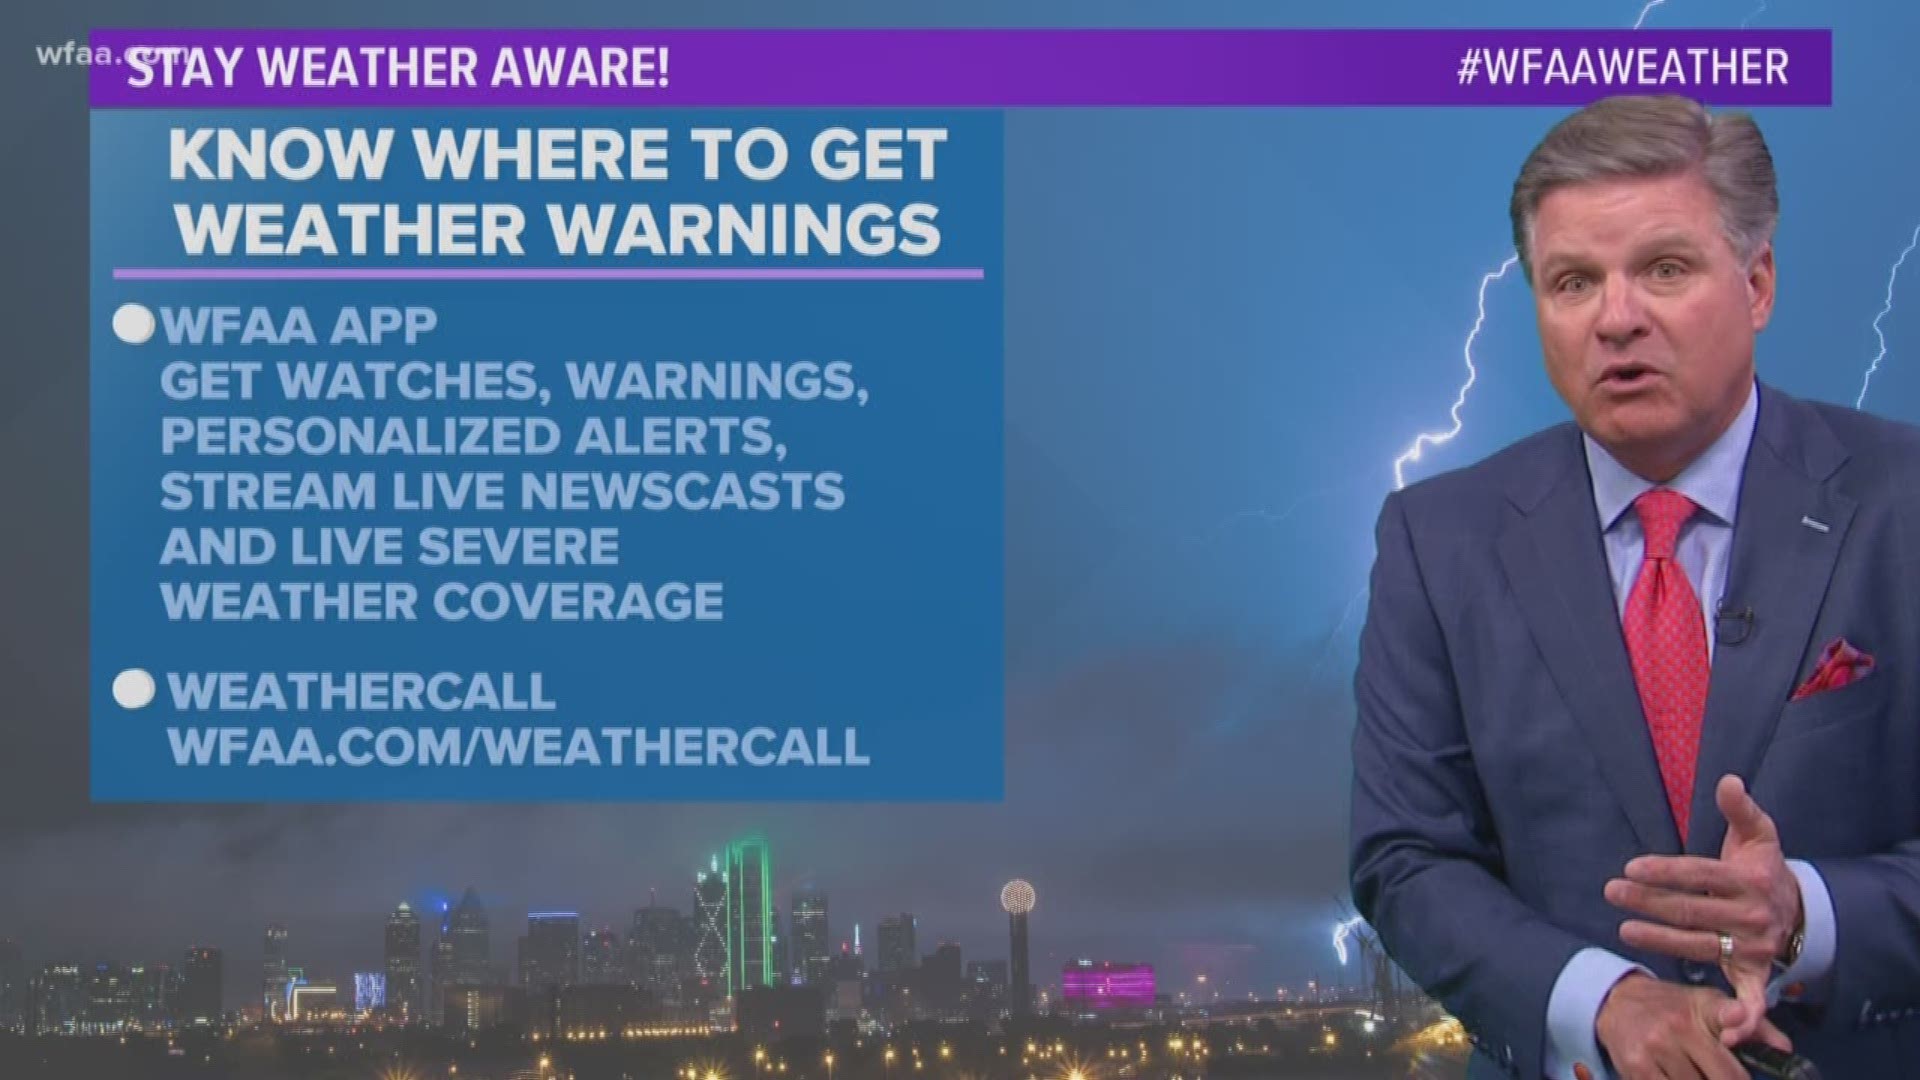 You can personalize your alerts and stream our live weather coverage.